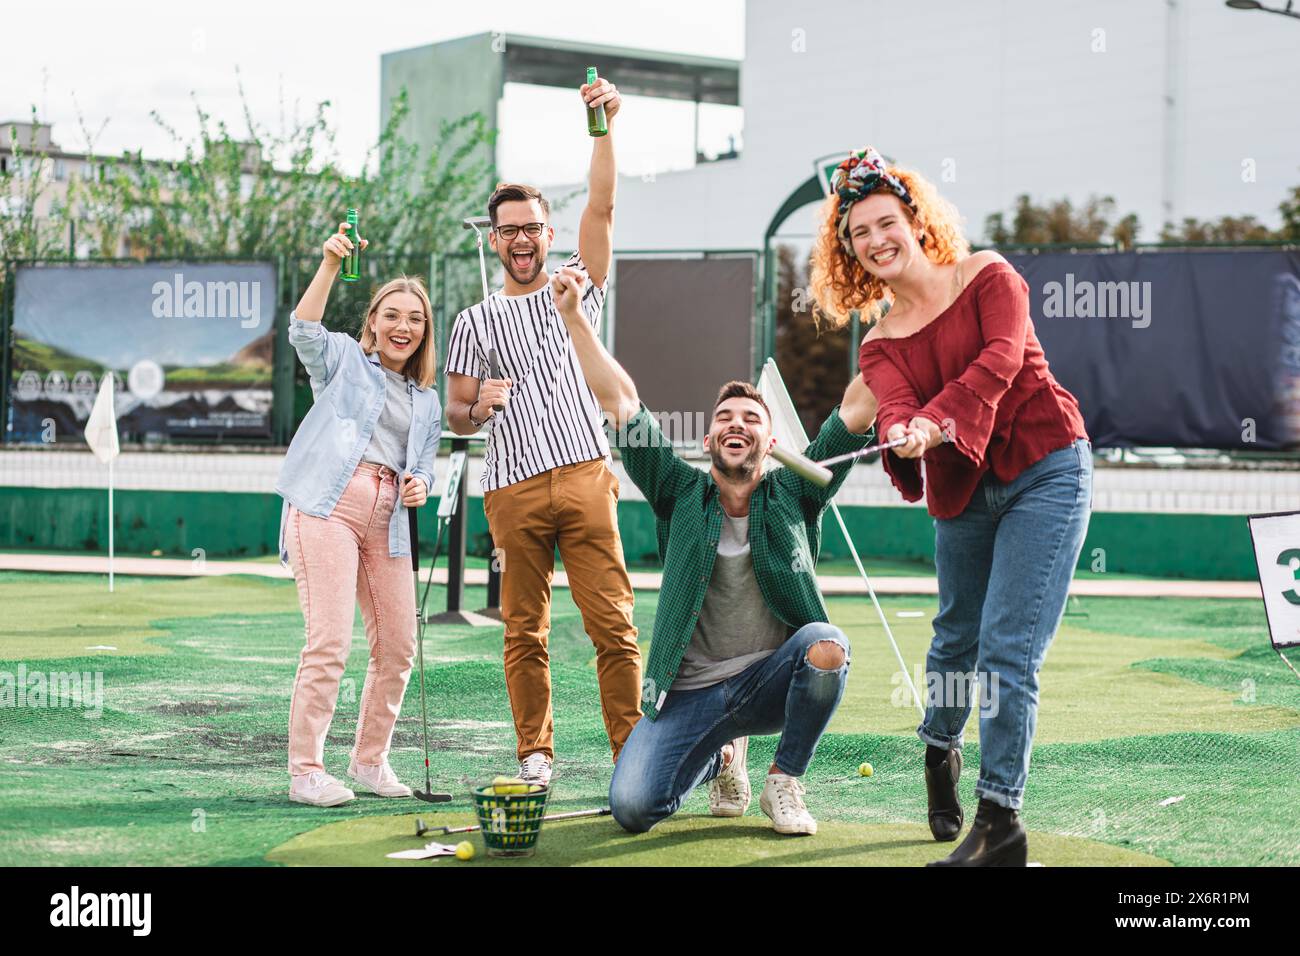 Group of smiling friends enjoying together playing mini golf in the city. Stock Photo